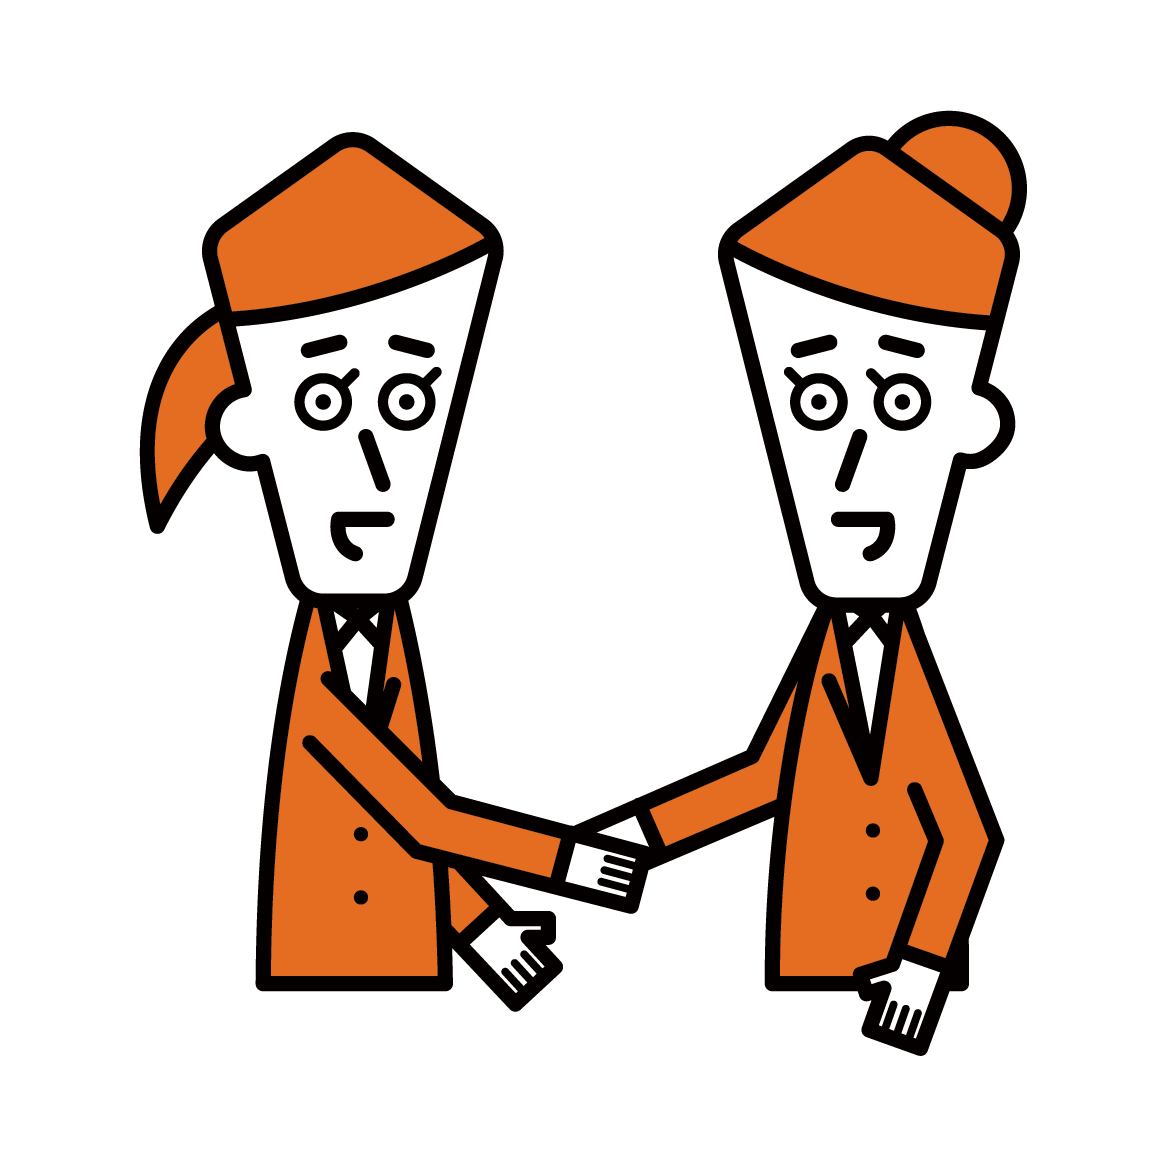 Illustration of a person shaking hands and trusting relationship (female)